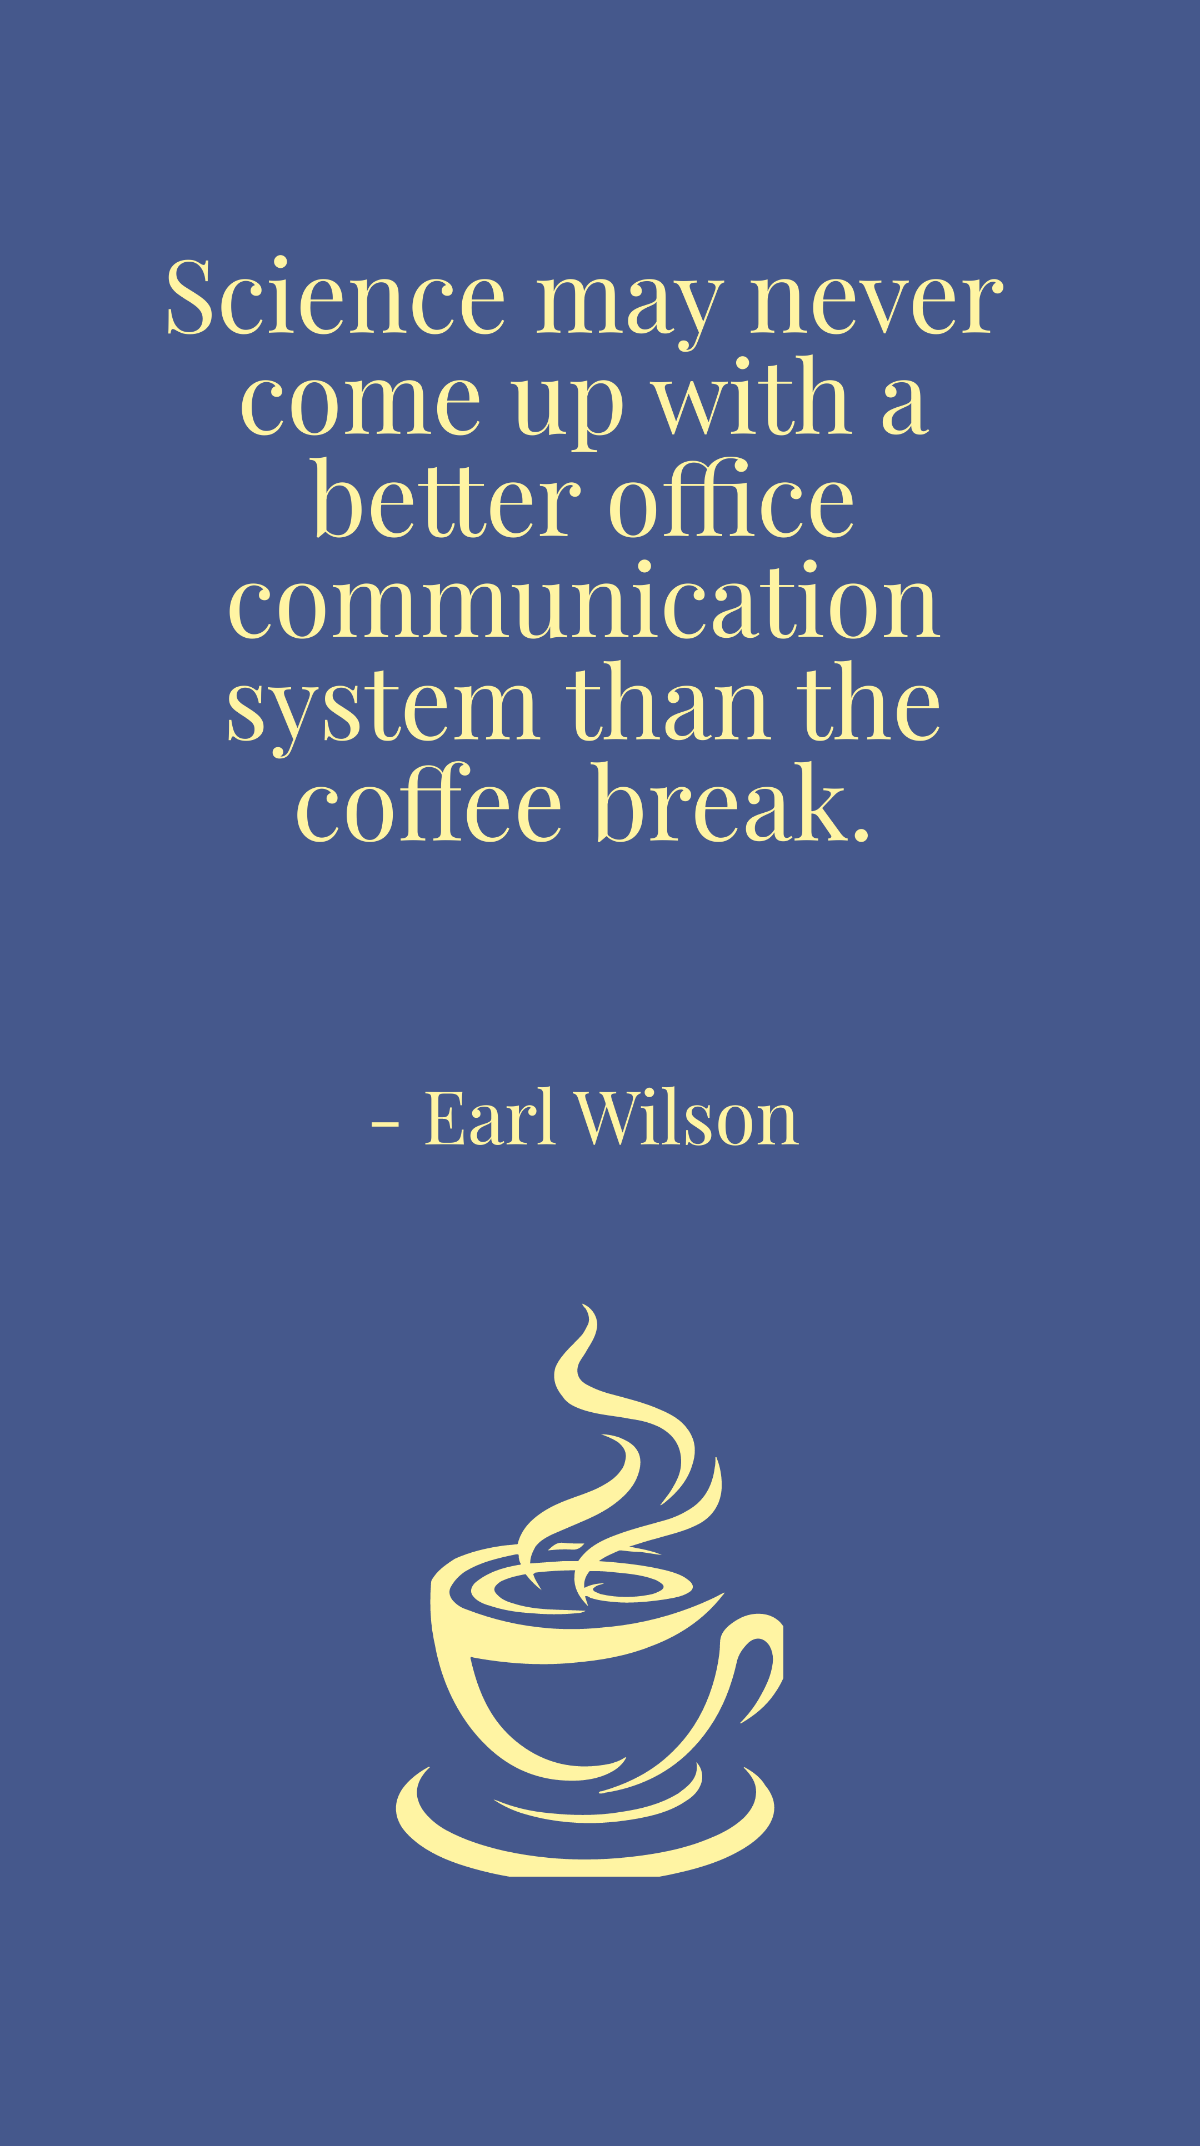 Earl Wilson - Science may never come up with a better office communication system than the coffee break. Template